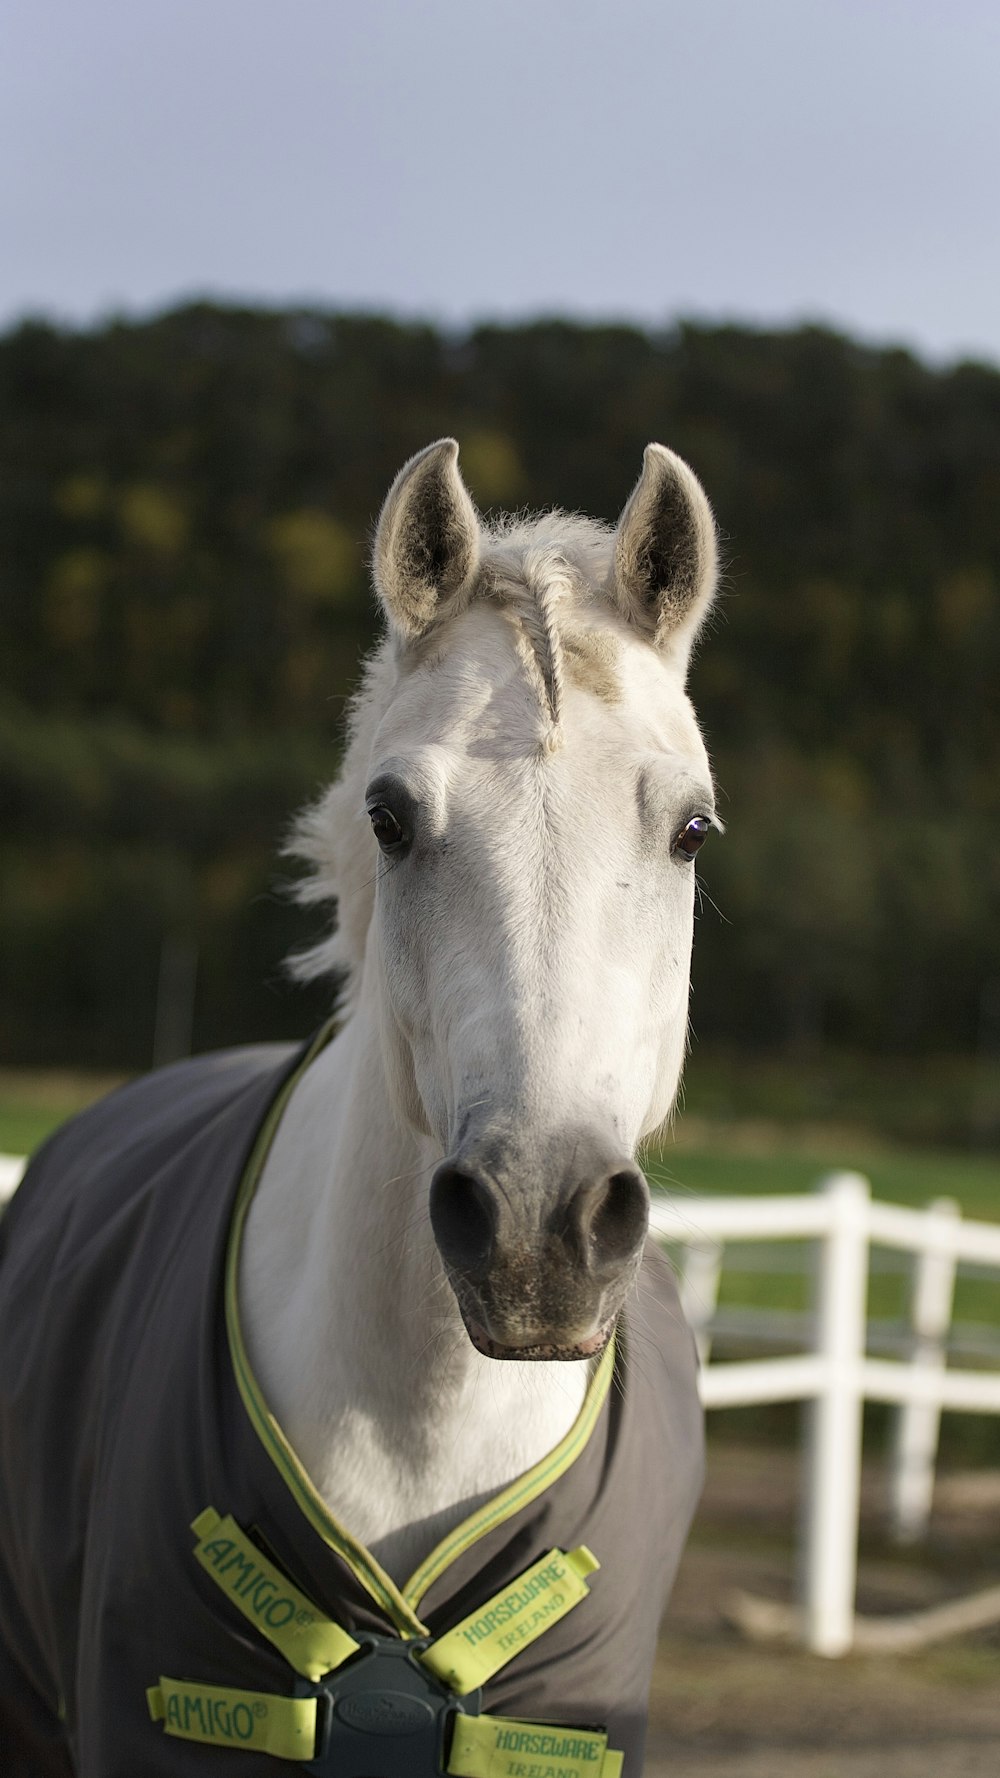 a white horse wearing a gray shirt and a green tie